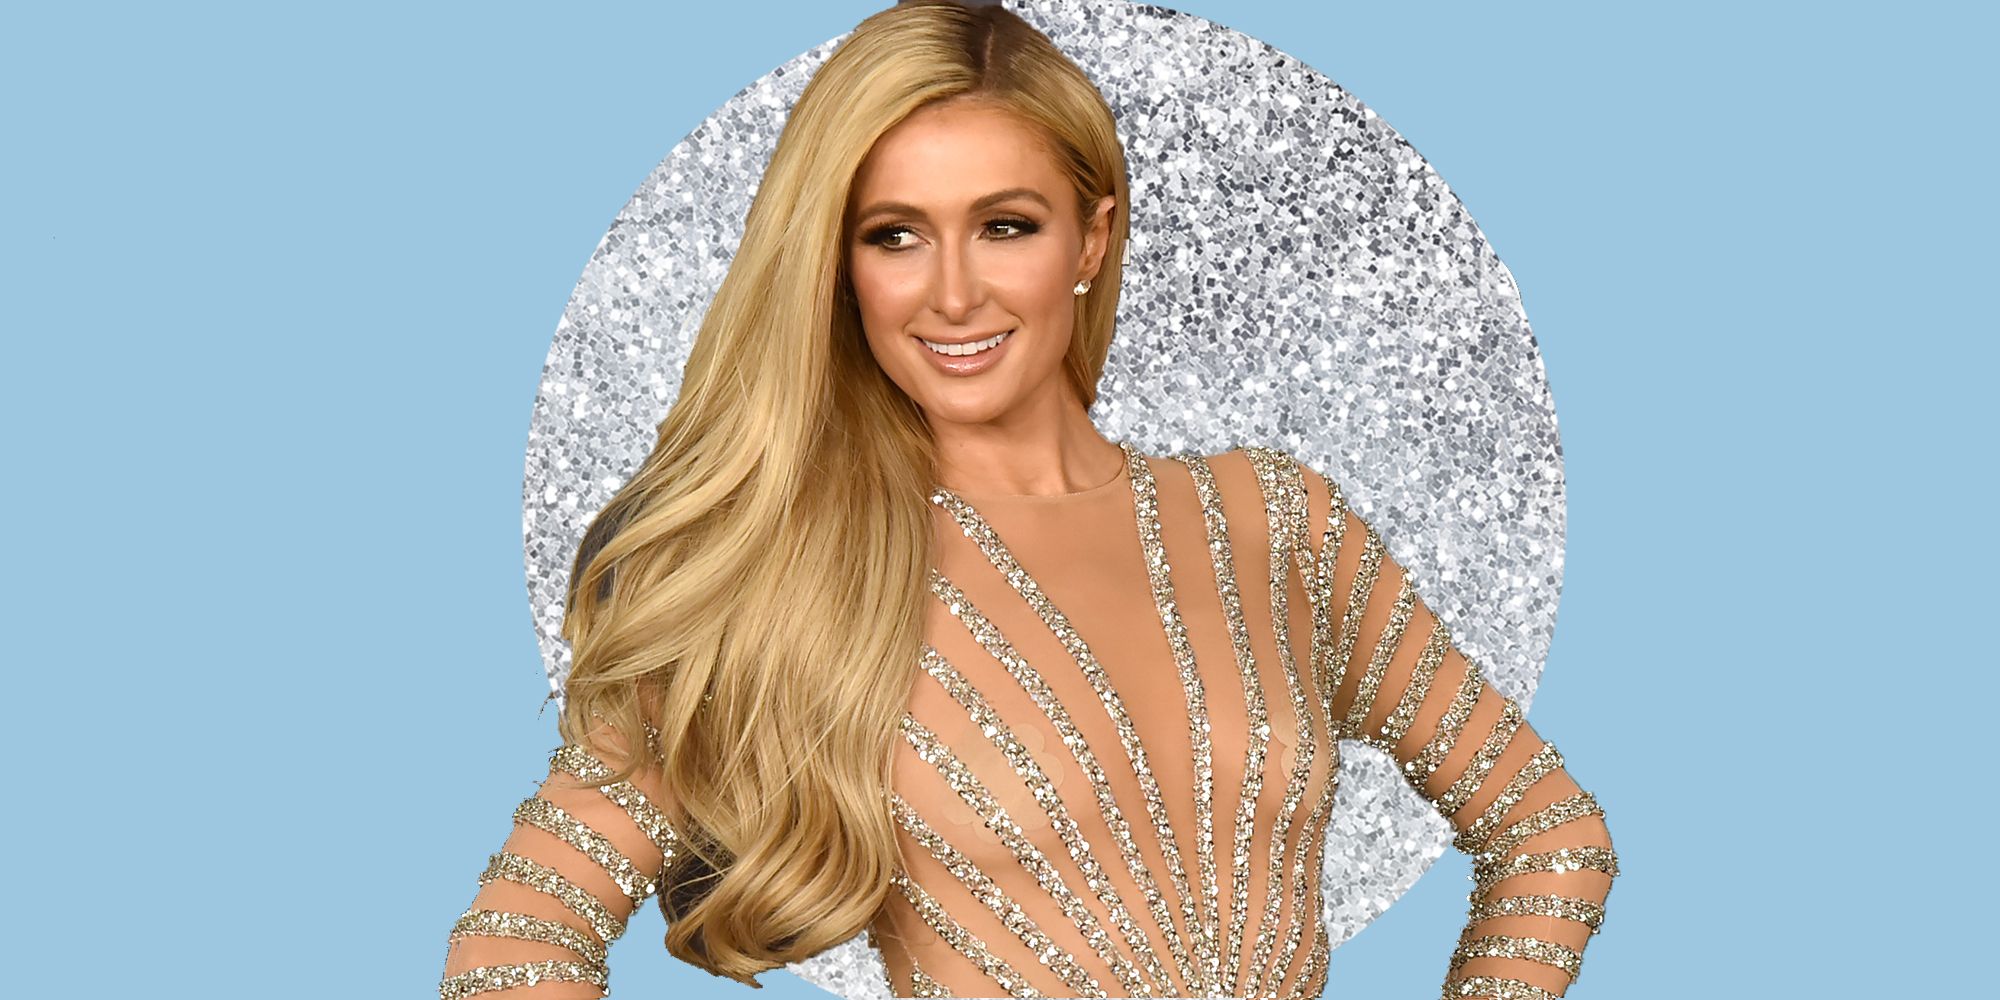 What's Paris Hilton up to today? Watch her documentary 'This is Paris